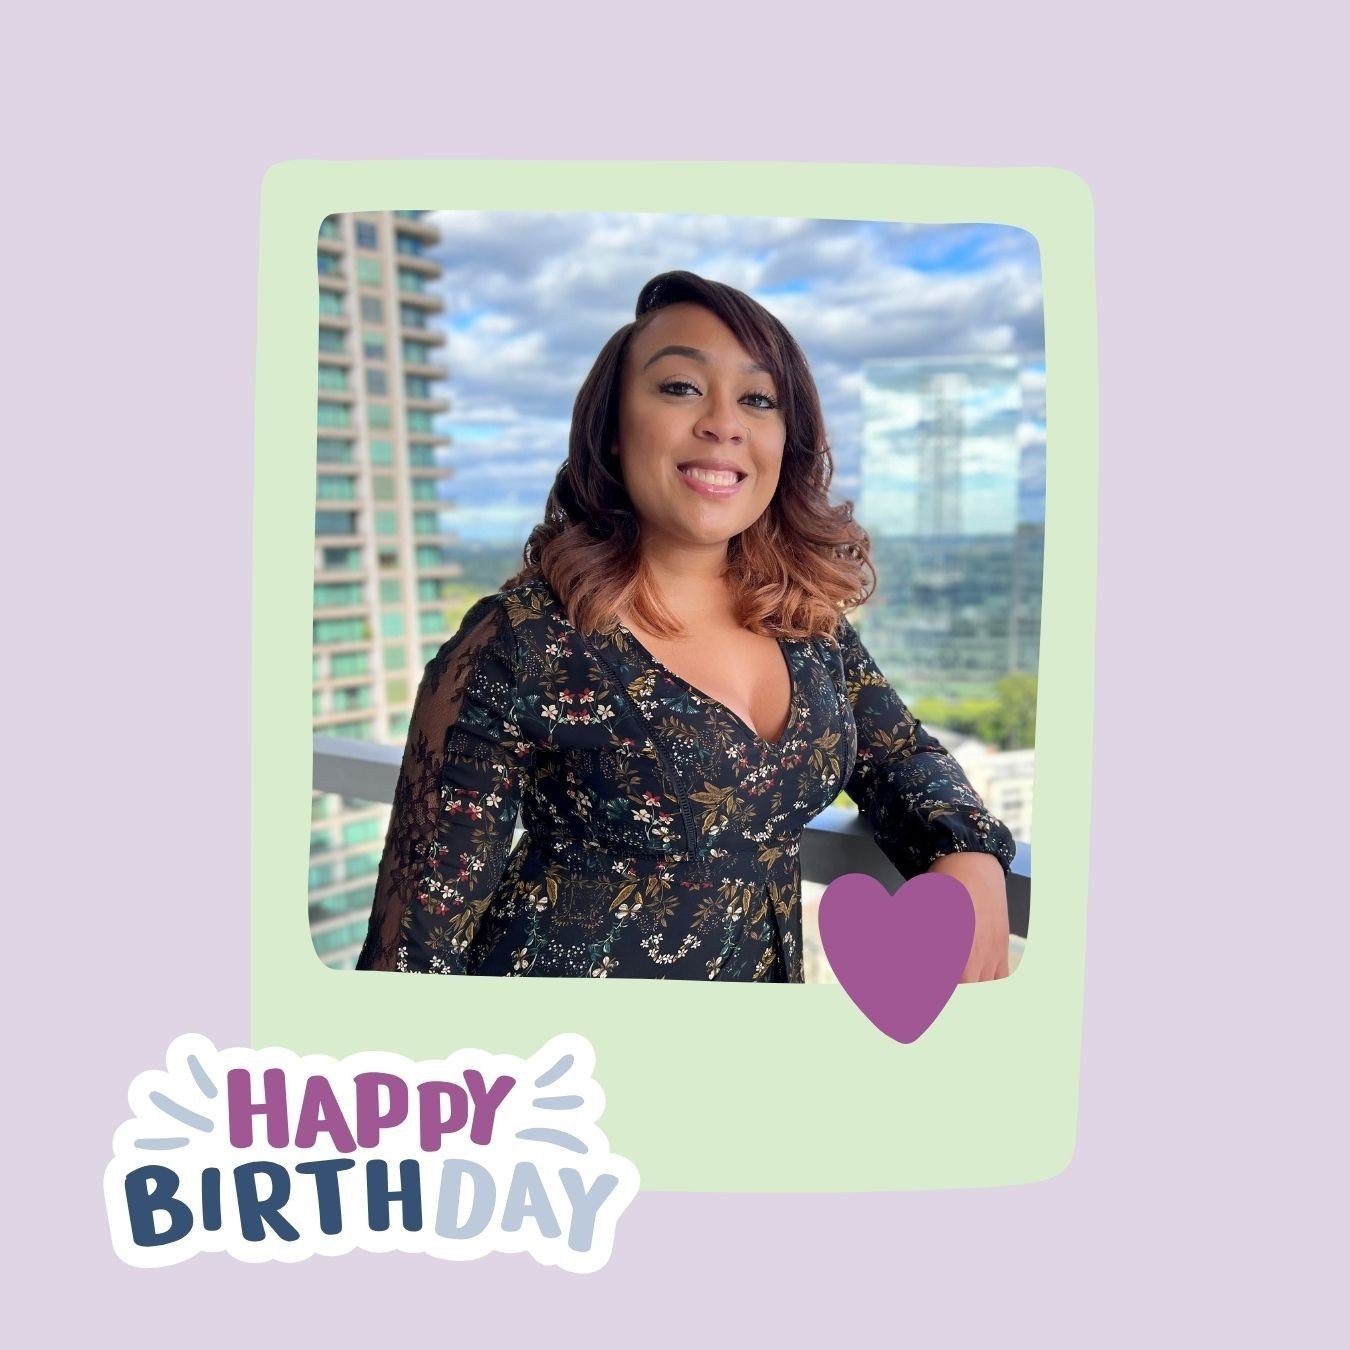 Please help us wish a happy birthday to Inner Balance therapist, Jolia Alexander! Jolia, thank you for all of the beautiful enthusiasm you bring to your work. We're so happy to have you on our team!